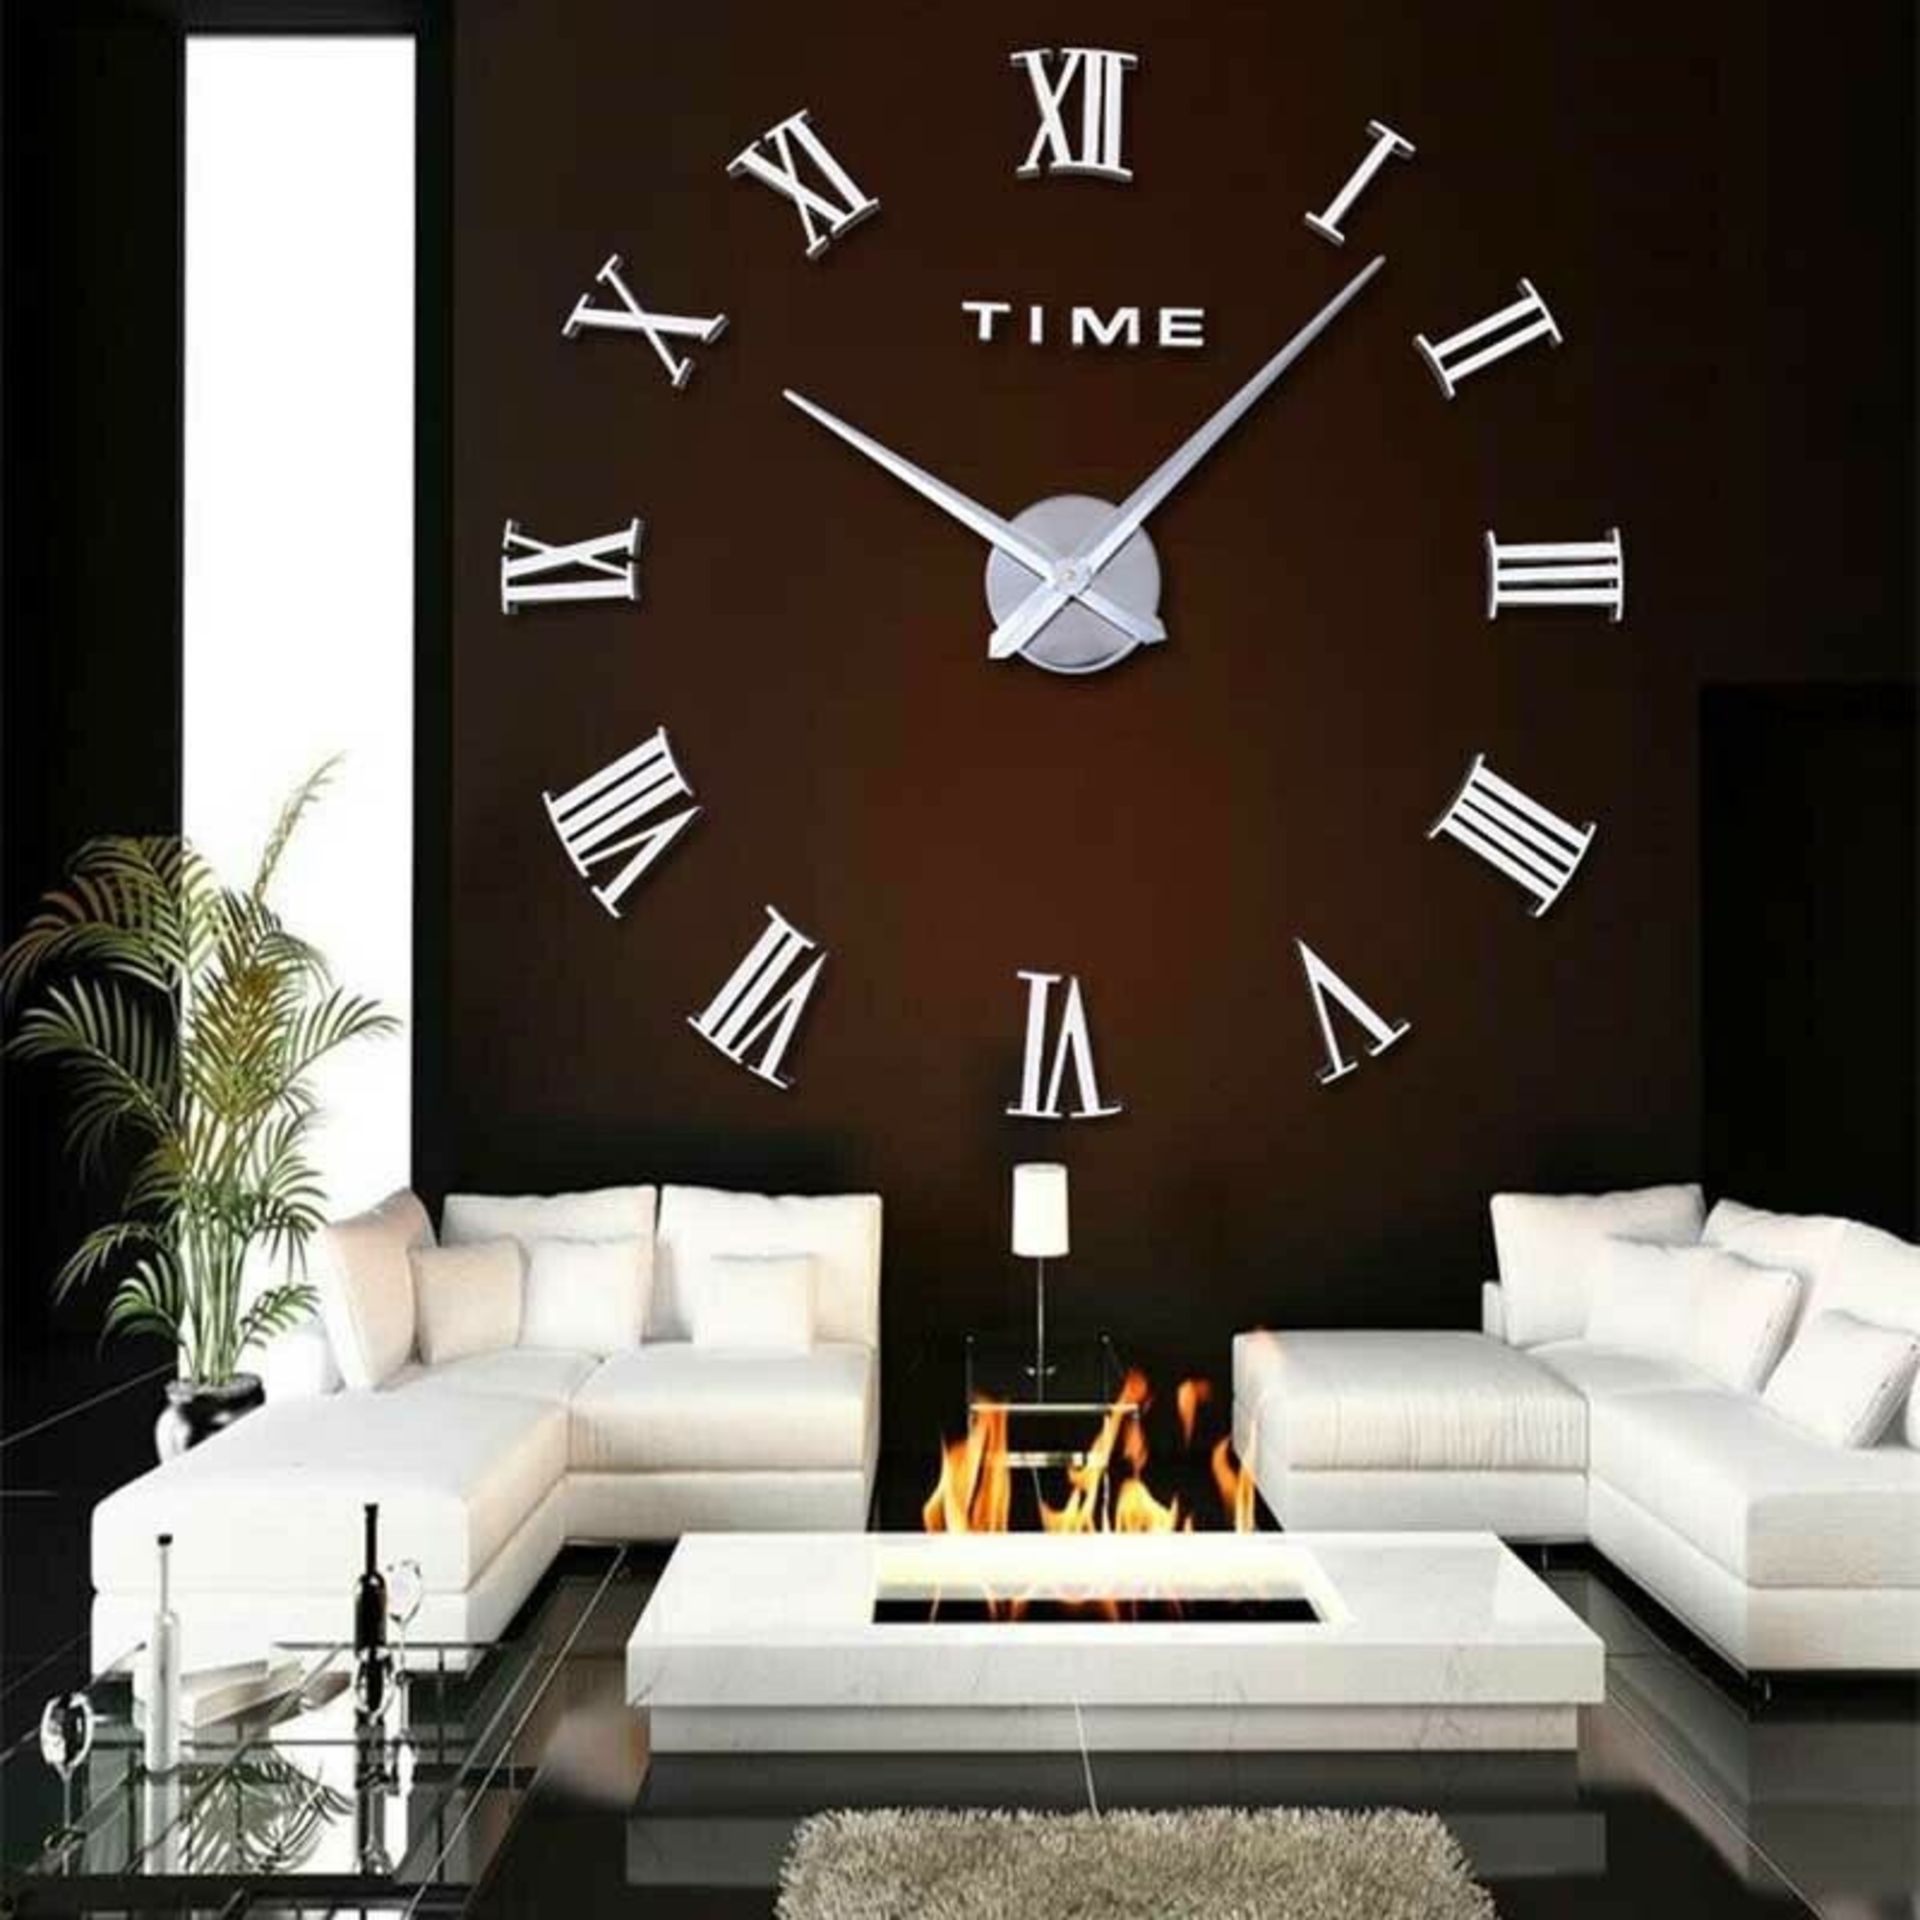 3D DIY EXTRA LARGE NUMERALS LUXURY MIRROR WALL CLOCK SILVER *PLUS VAT* - Image 3 of 5